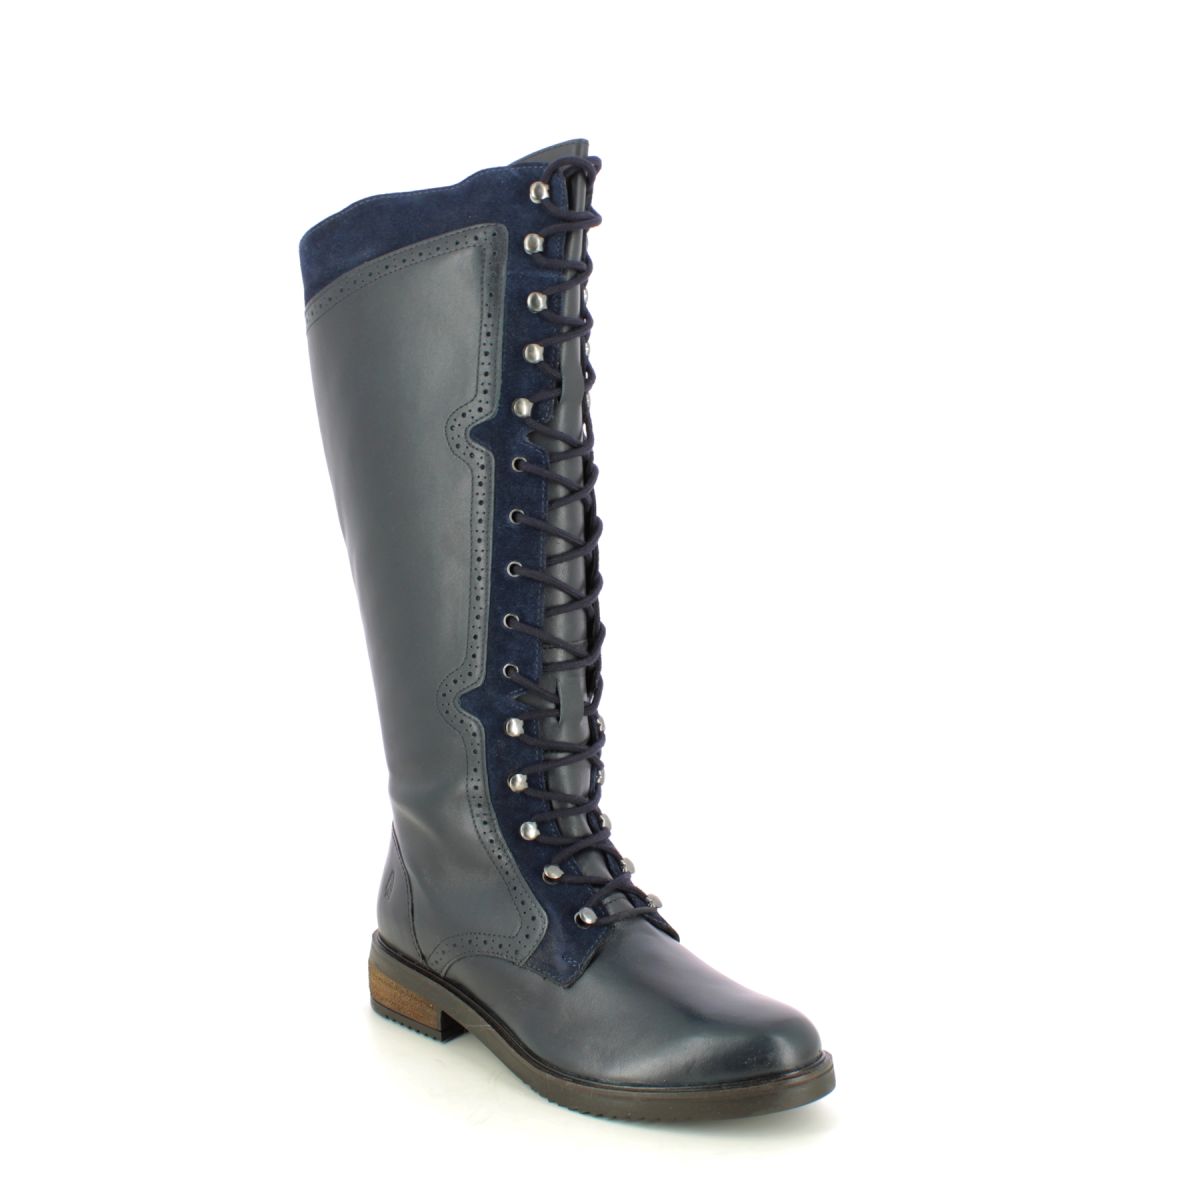 Hush Puppies Rudy Boot Lace Navy leather Womens knee-high boots 29203-66508 in a Plain Leather in Size 8